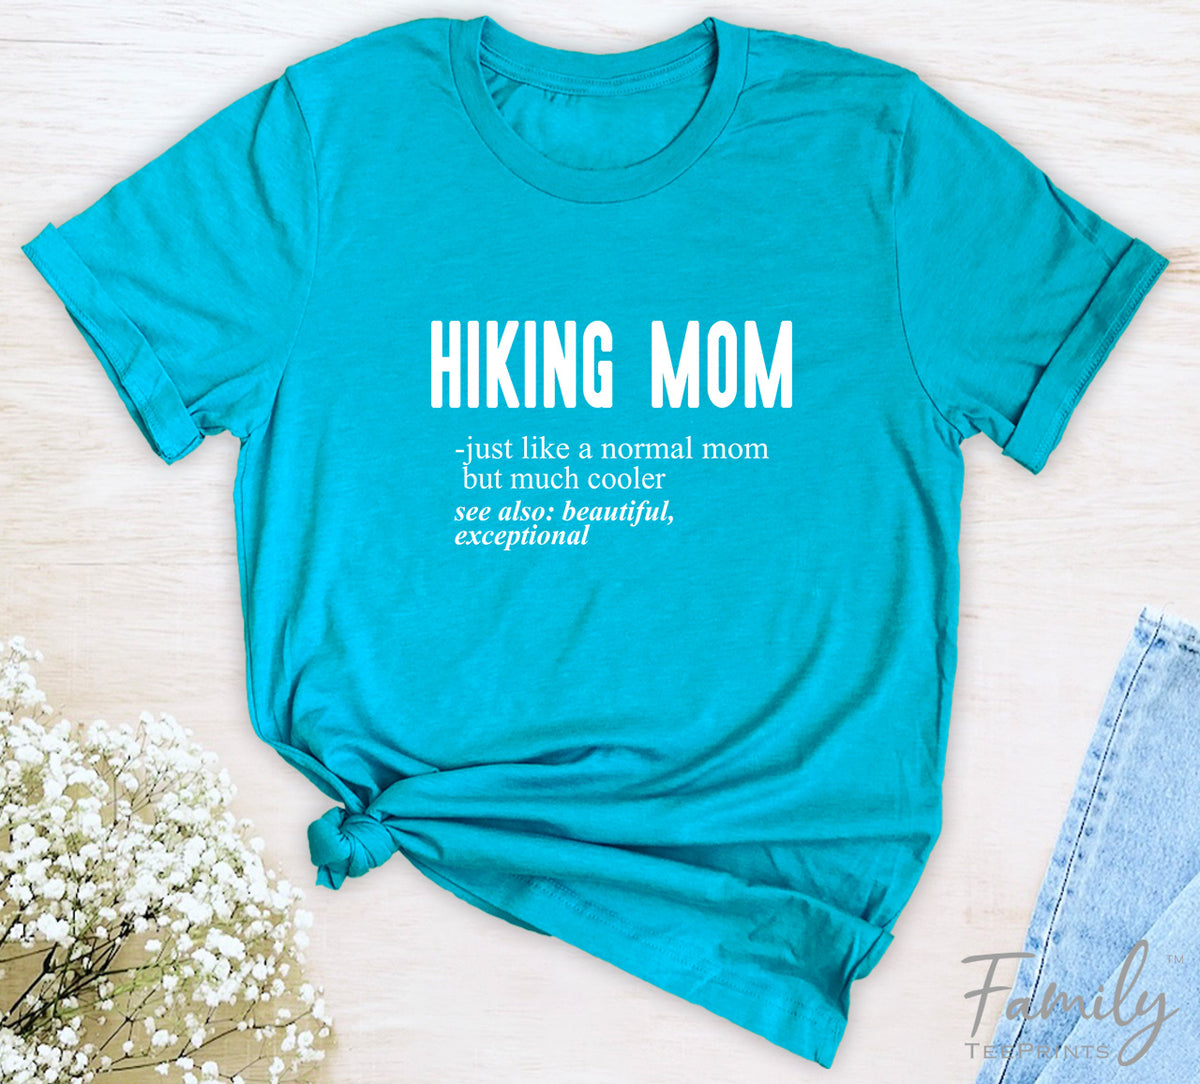 Hiking Mom Just Like A Normal Mom - Unisex T-shirt - Hiking Mom Shirt - Gift For Hiking Mom - familyteeprints